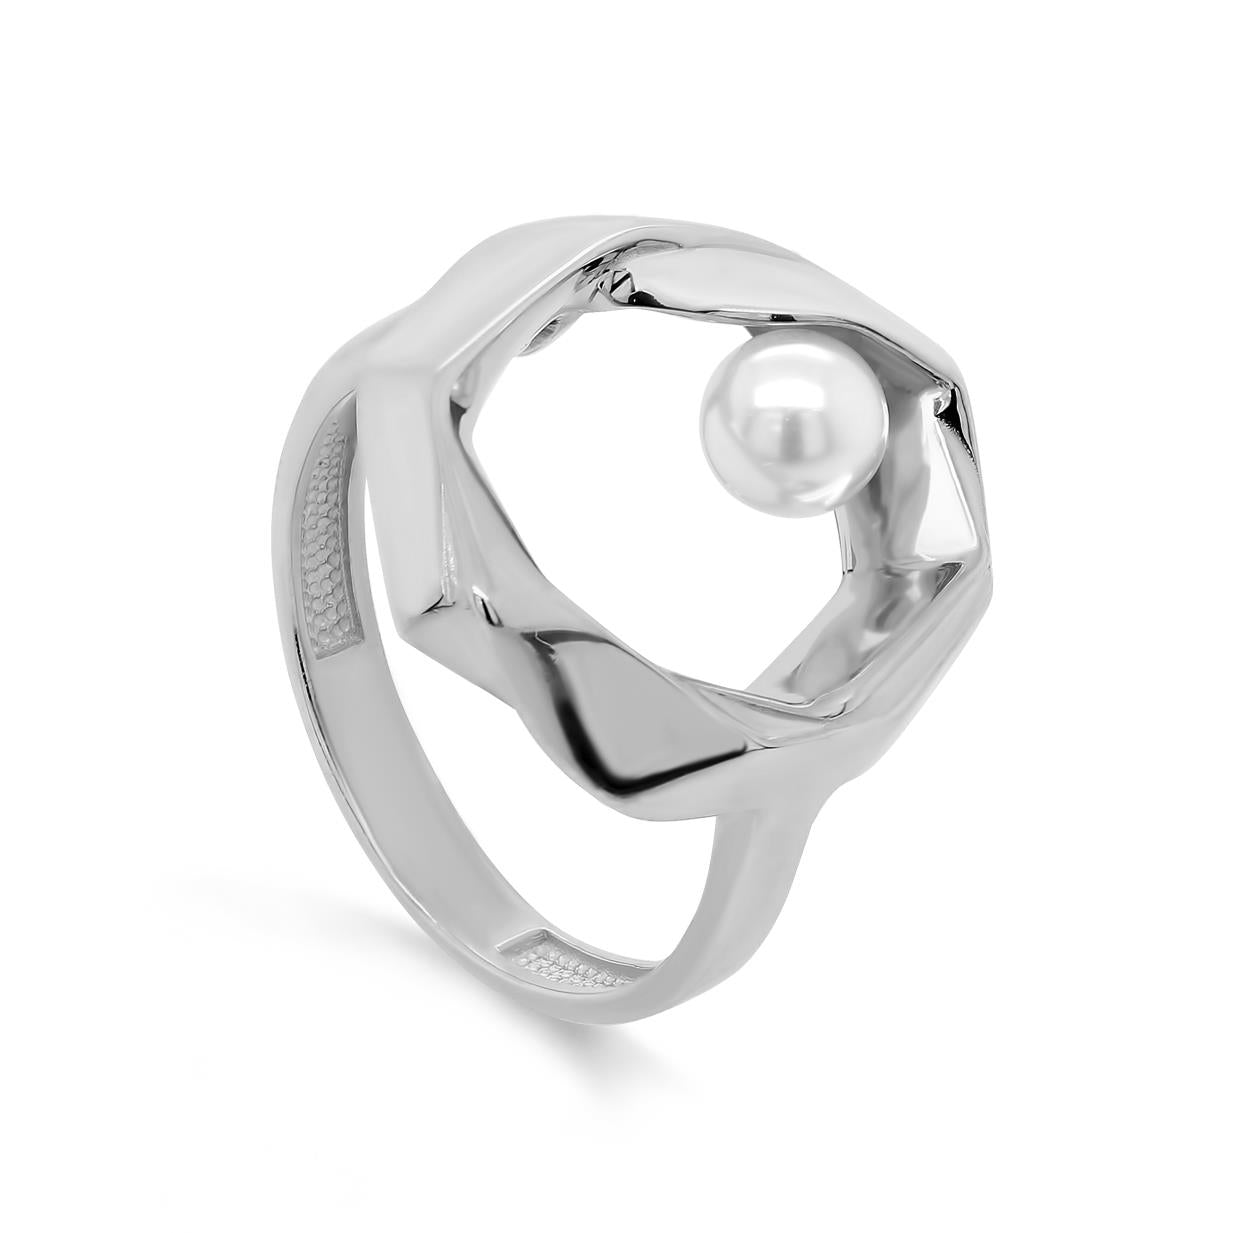 Ring Silver crush with pearls